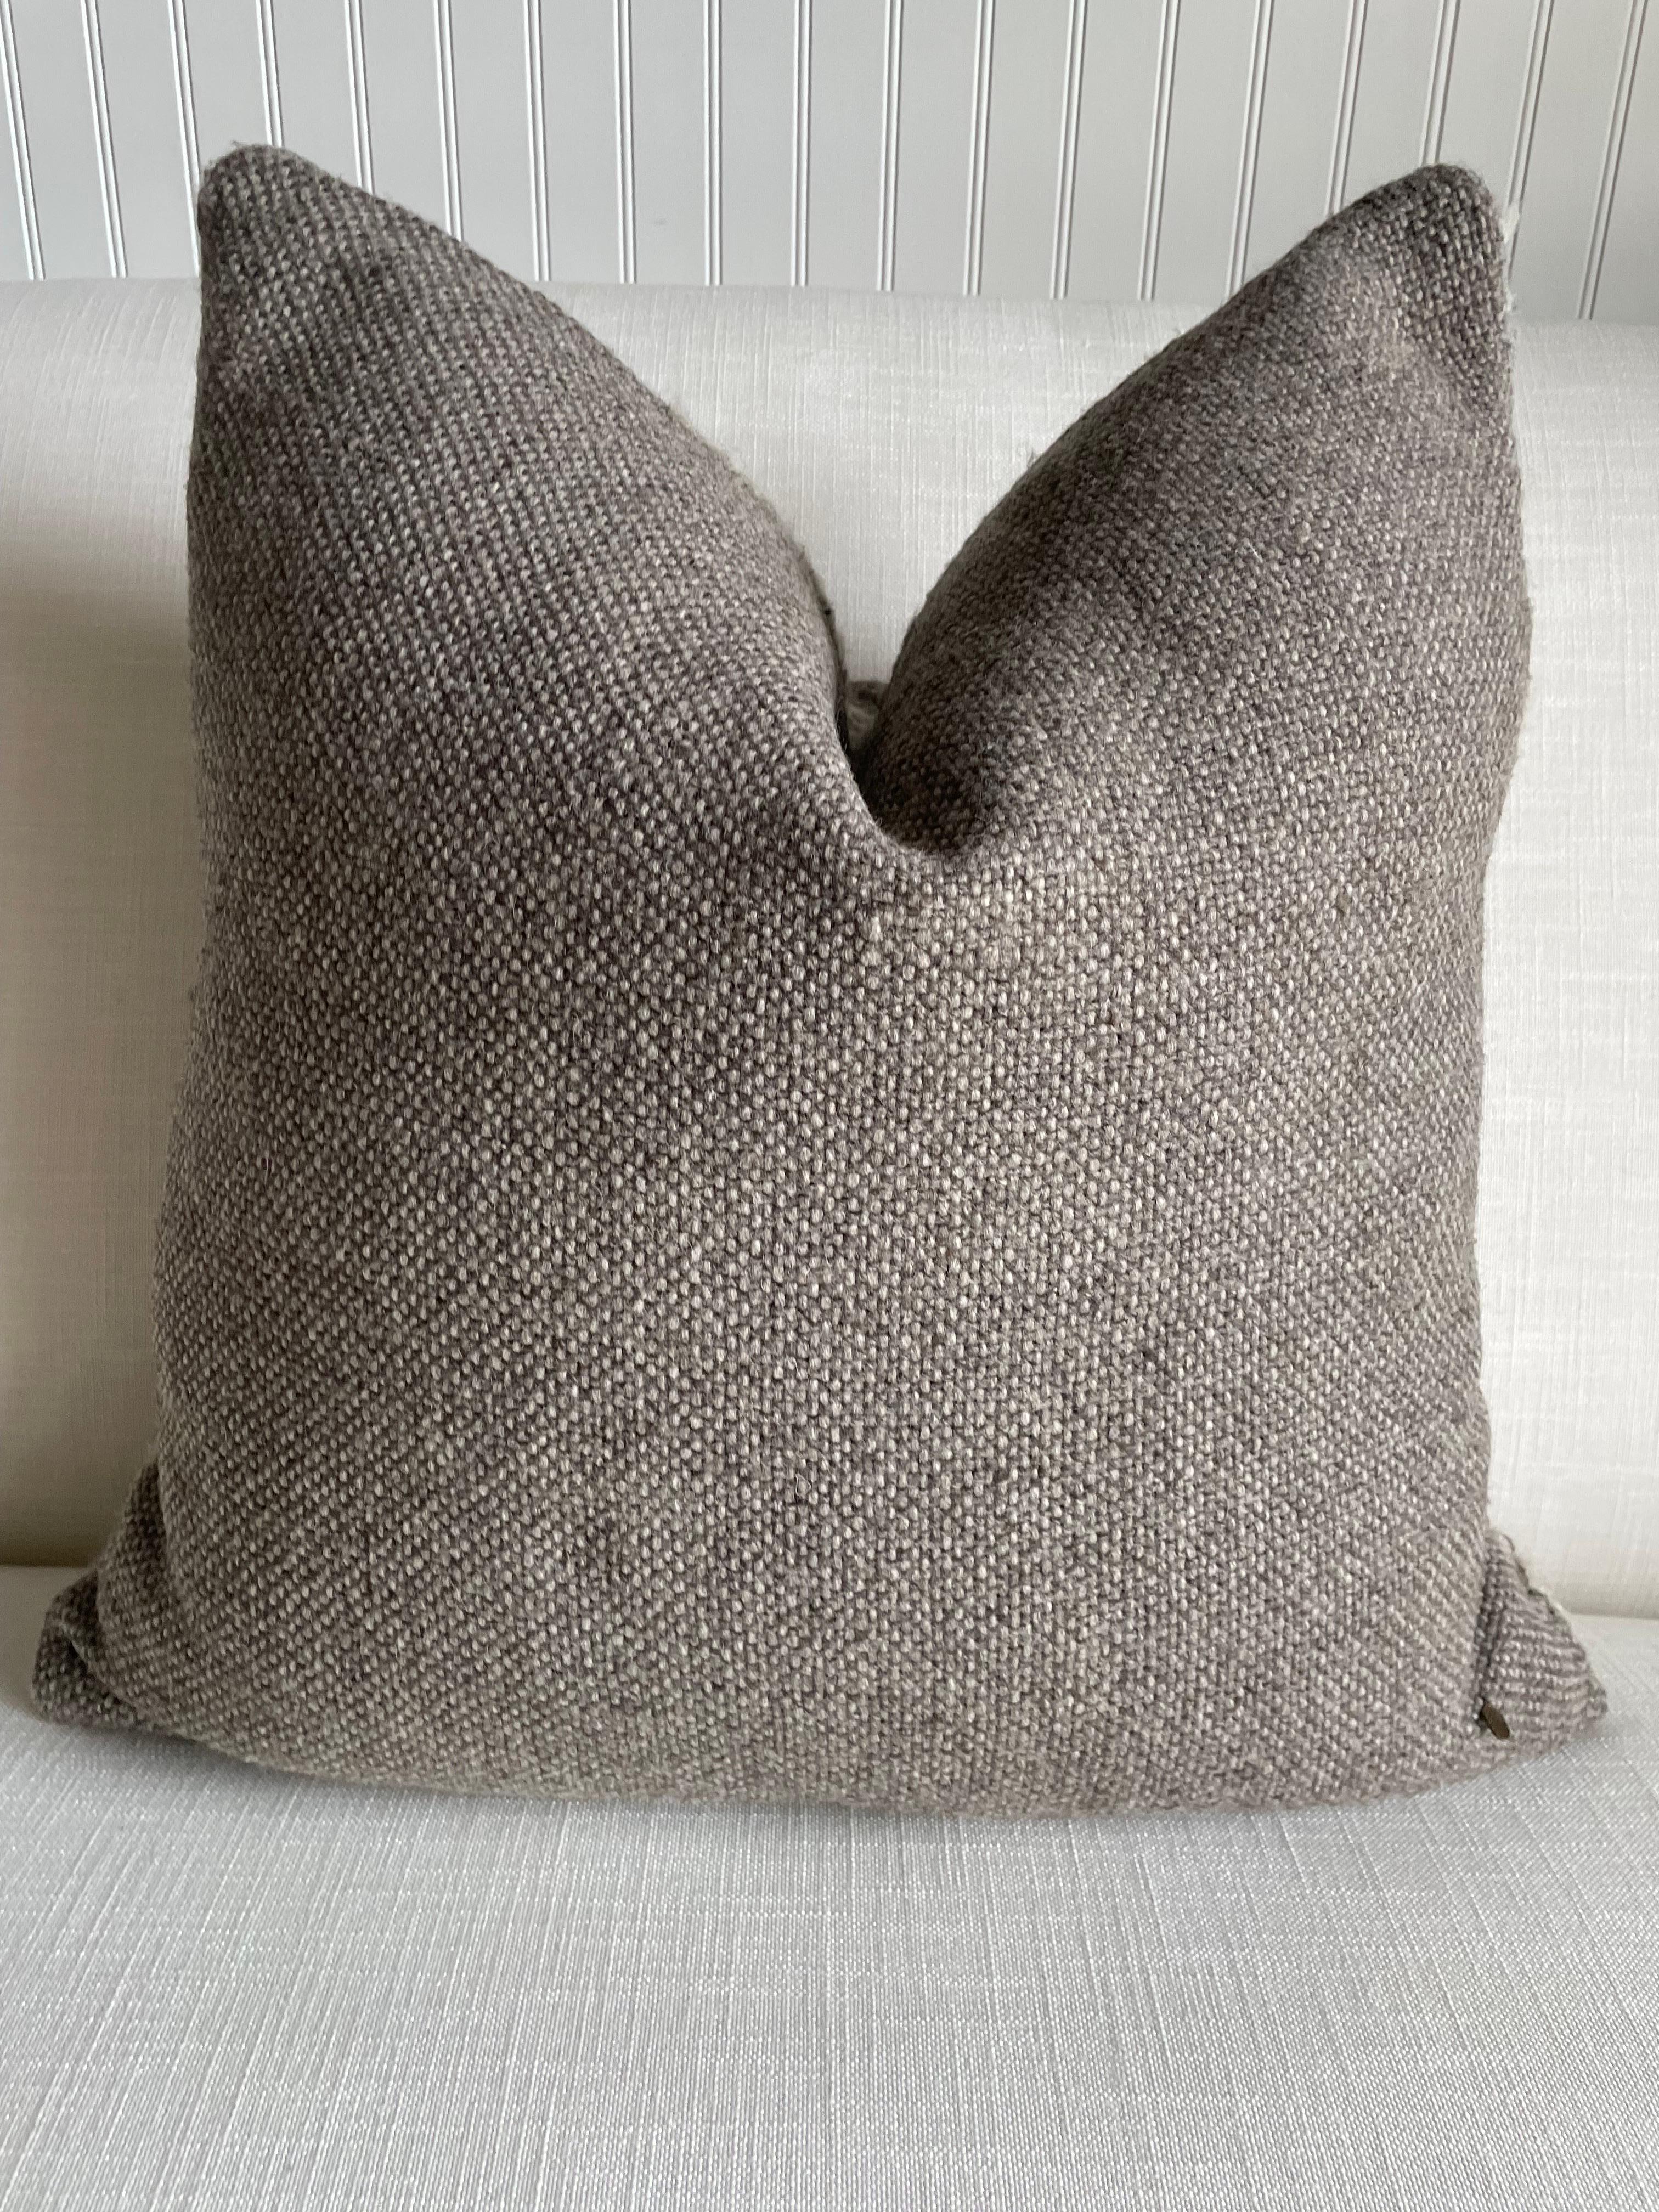 Villa Hand Made Wool Pillow with Down Insert For Sale 4